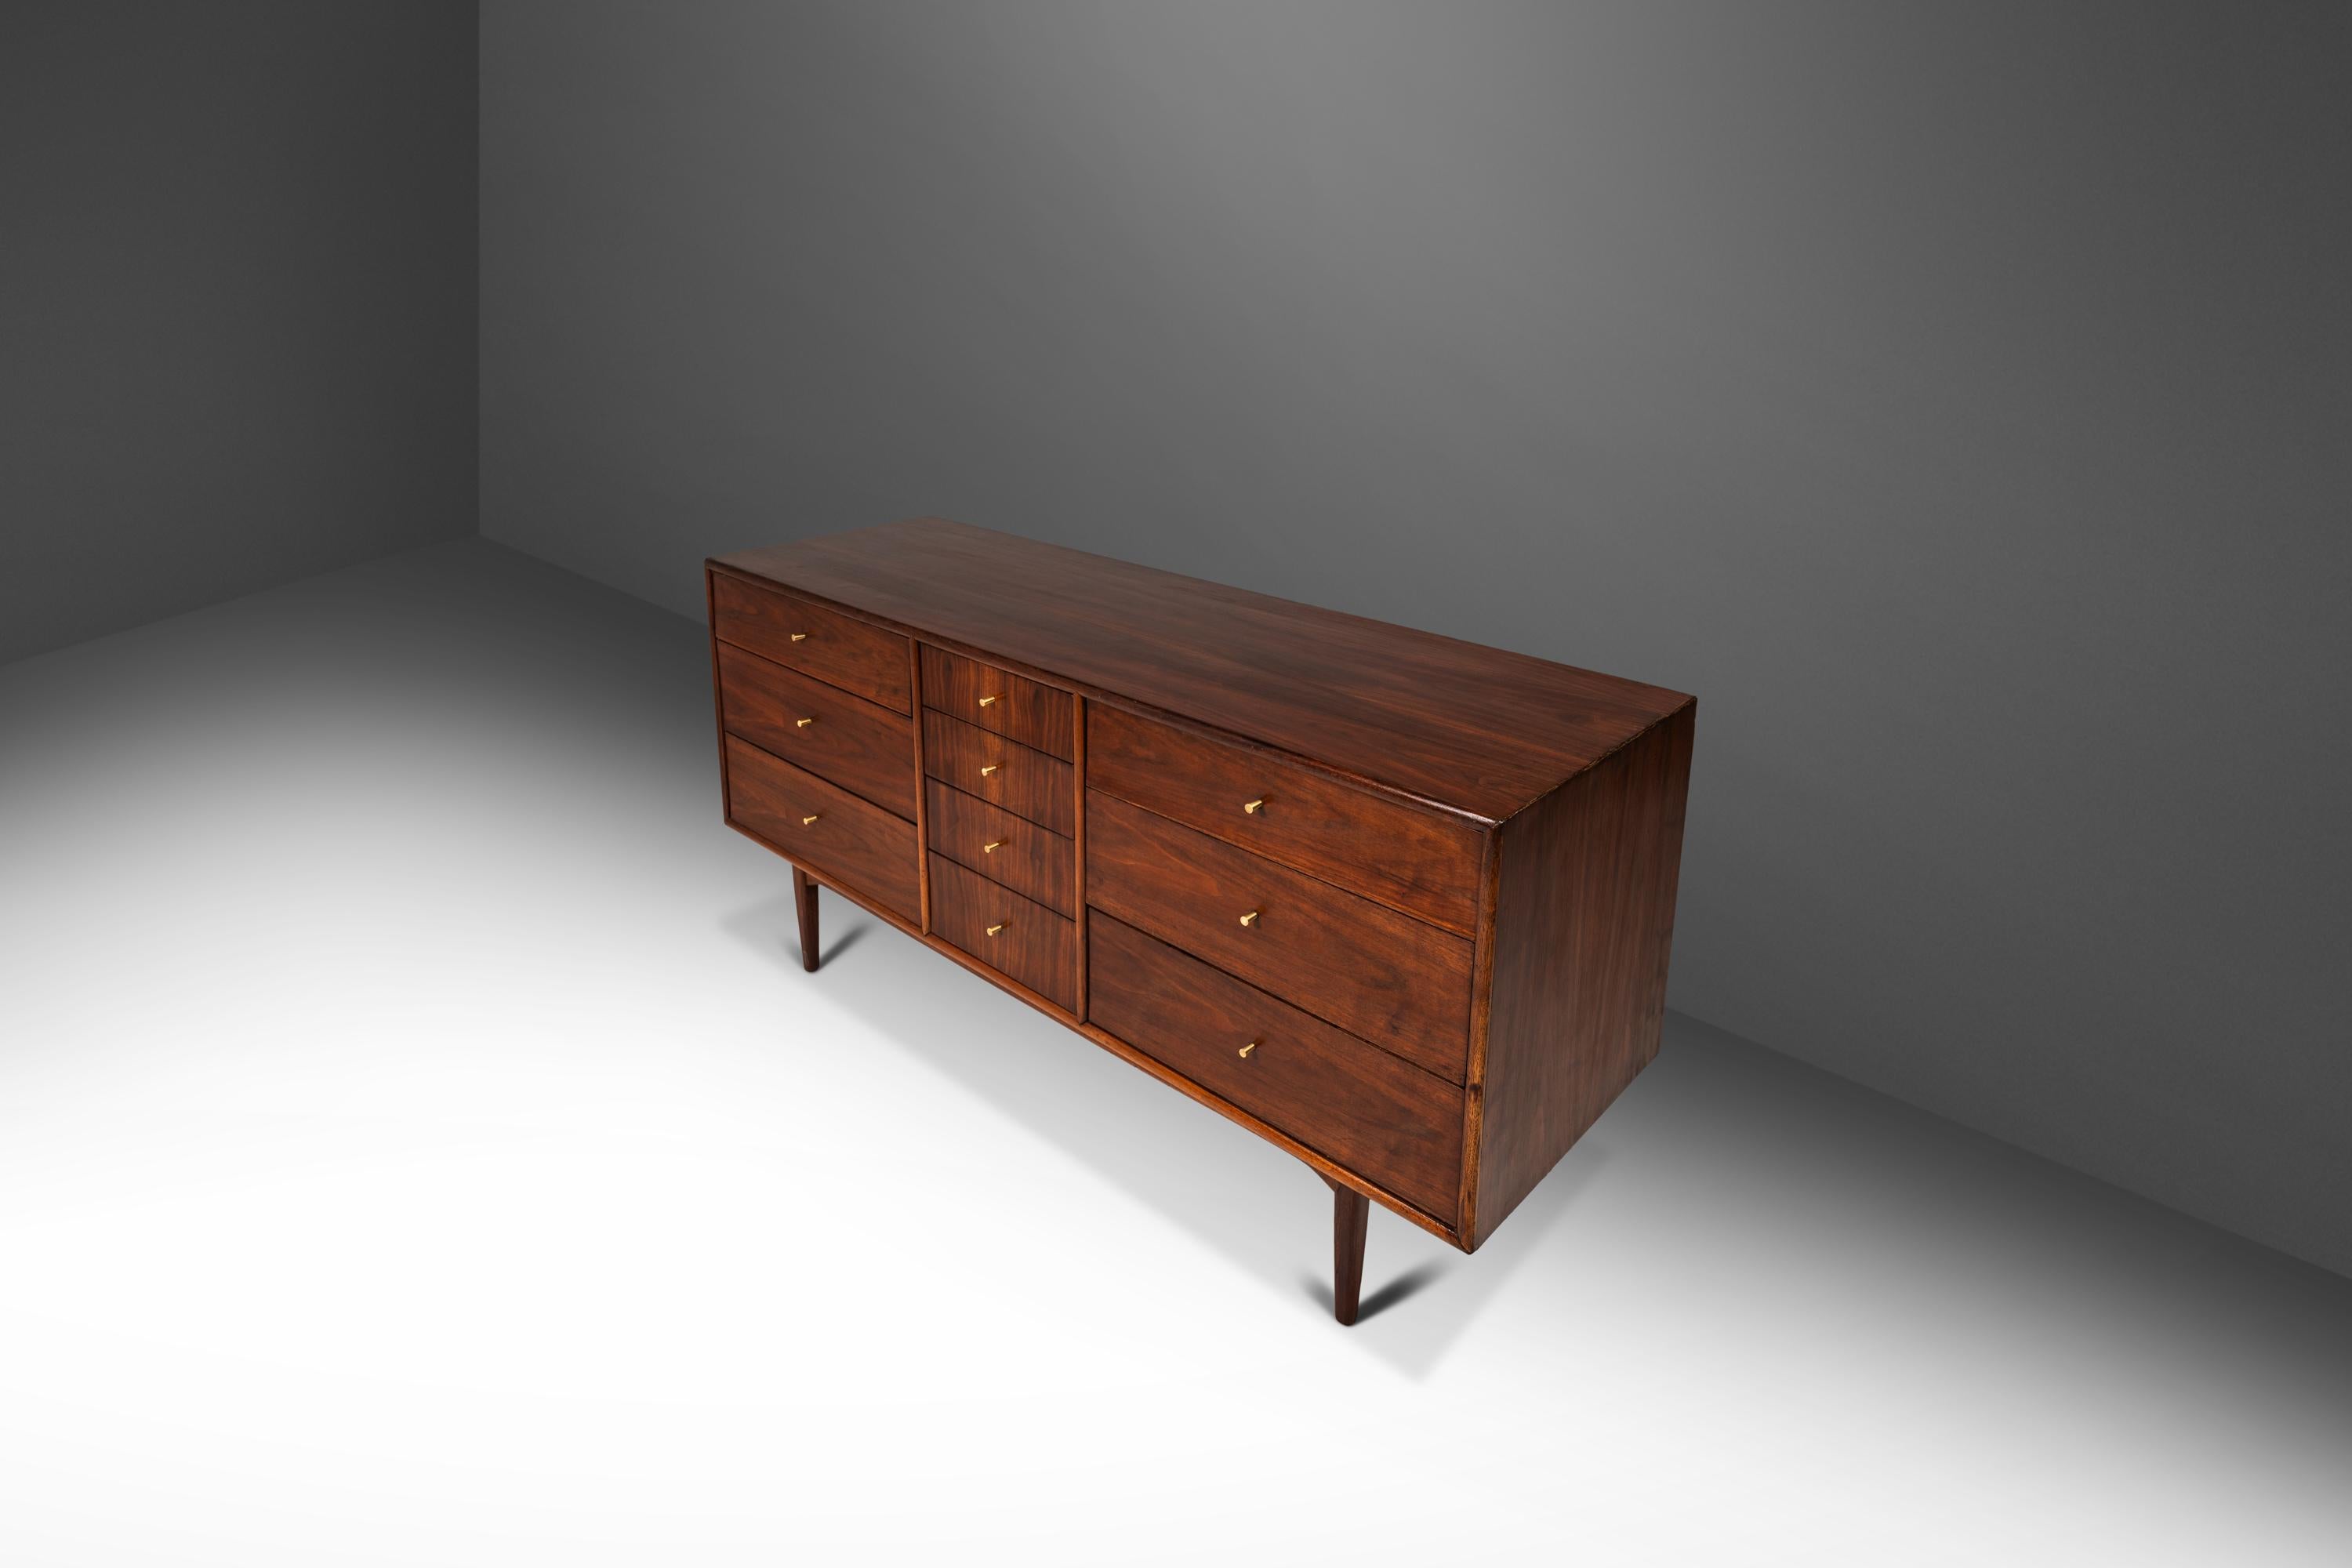 Introducing a rare 10-drawer dresser designed by the influential Kipp Stewart for the venerated Drexel Furniture Co. Built from a mix of solid and veneered American black walnut this gorgeous American icon functions well as both a credenza/TV stand